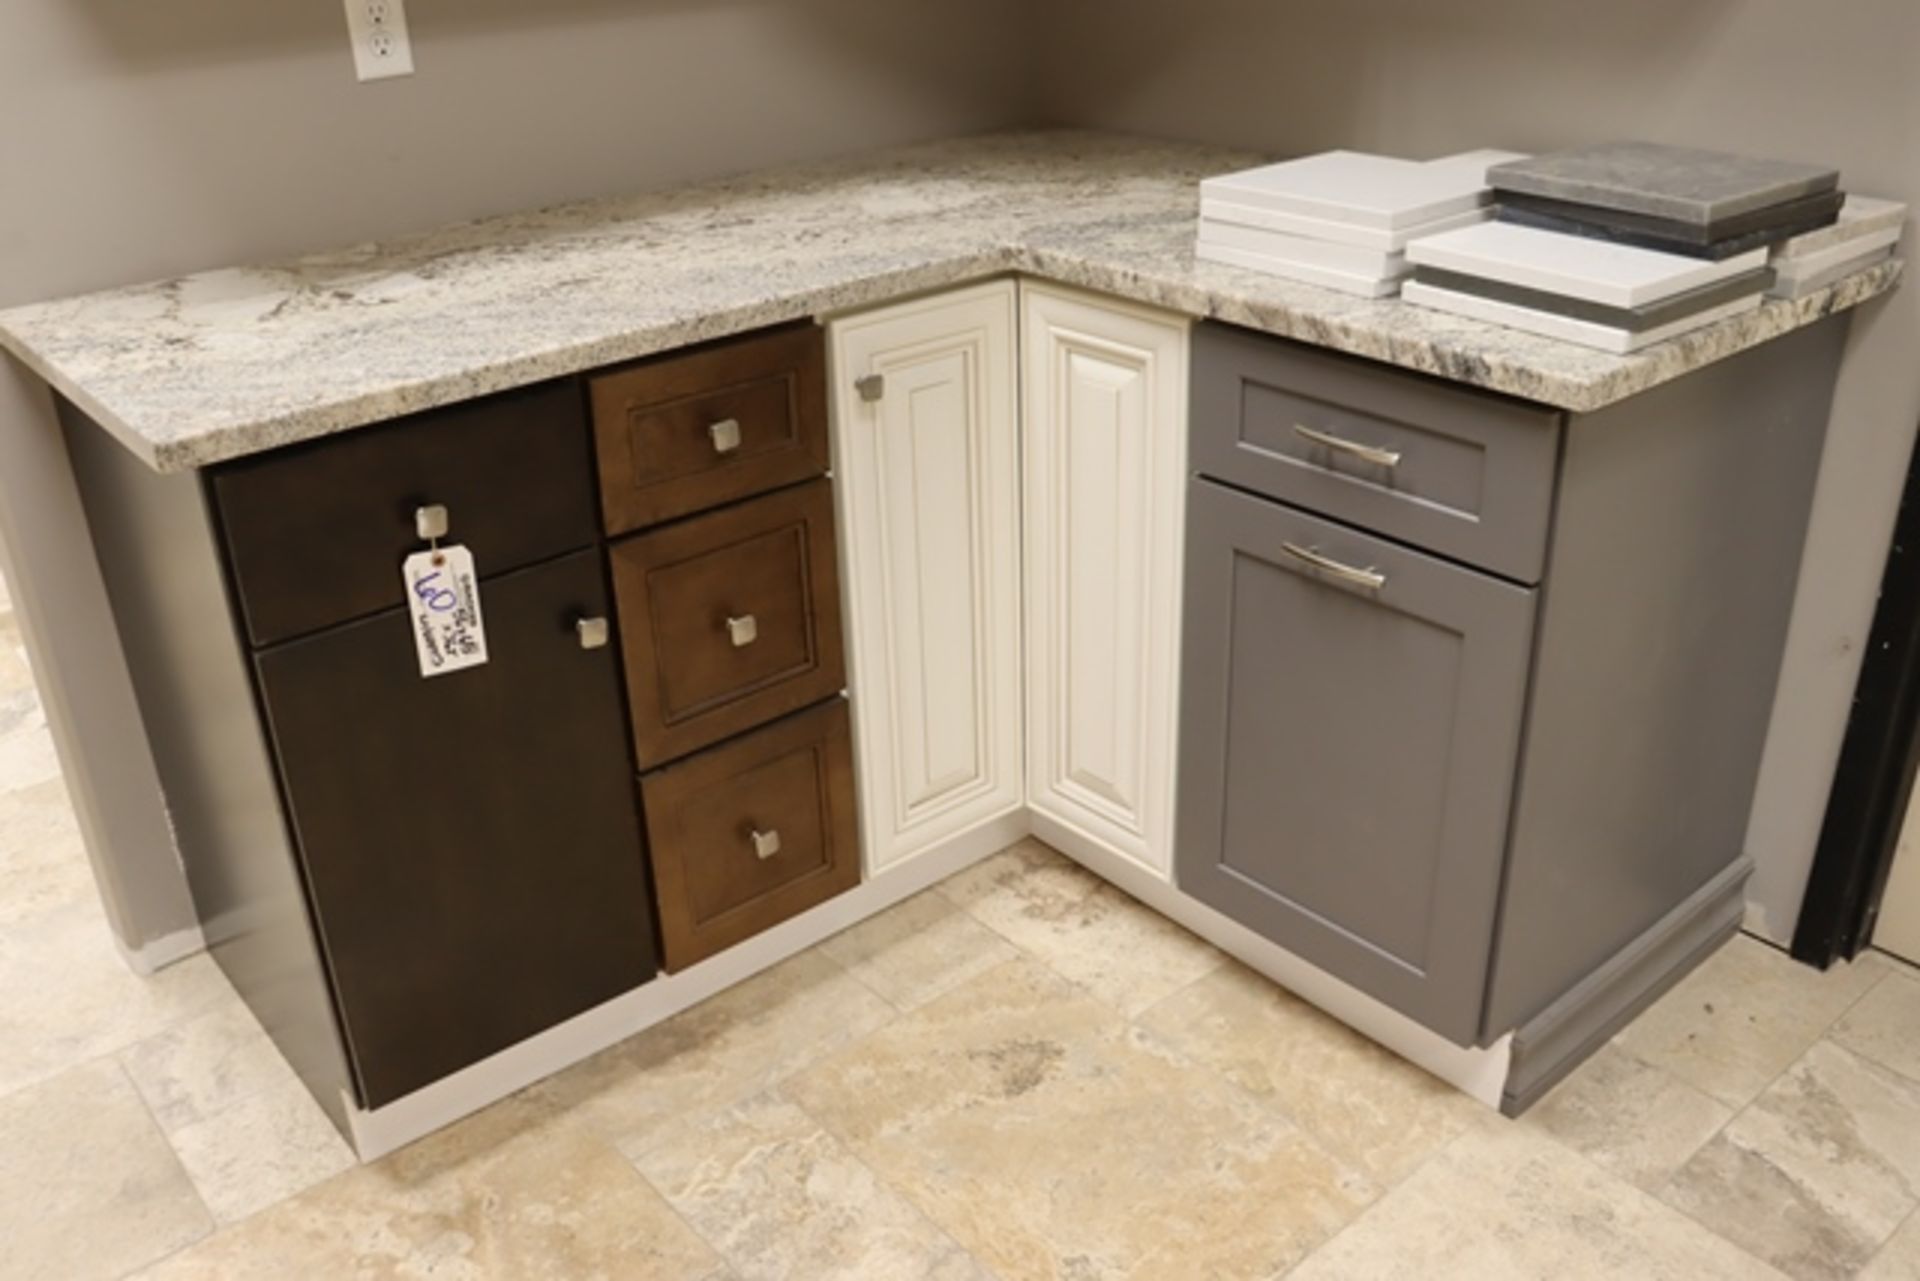 56" x 65" x 36" L shaped base cabinet display with upper cabinets and solid - Image 2 of 3